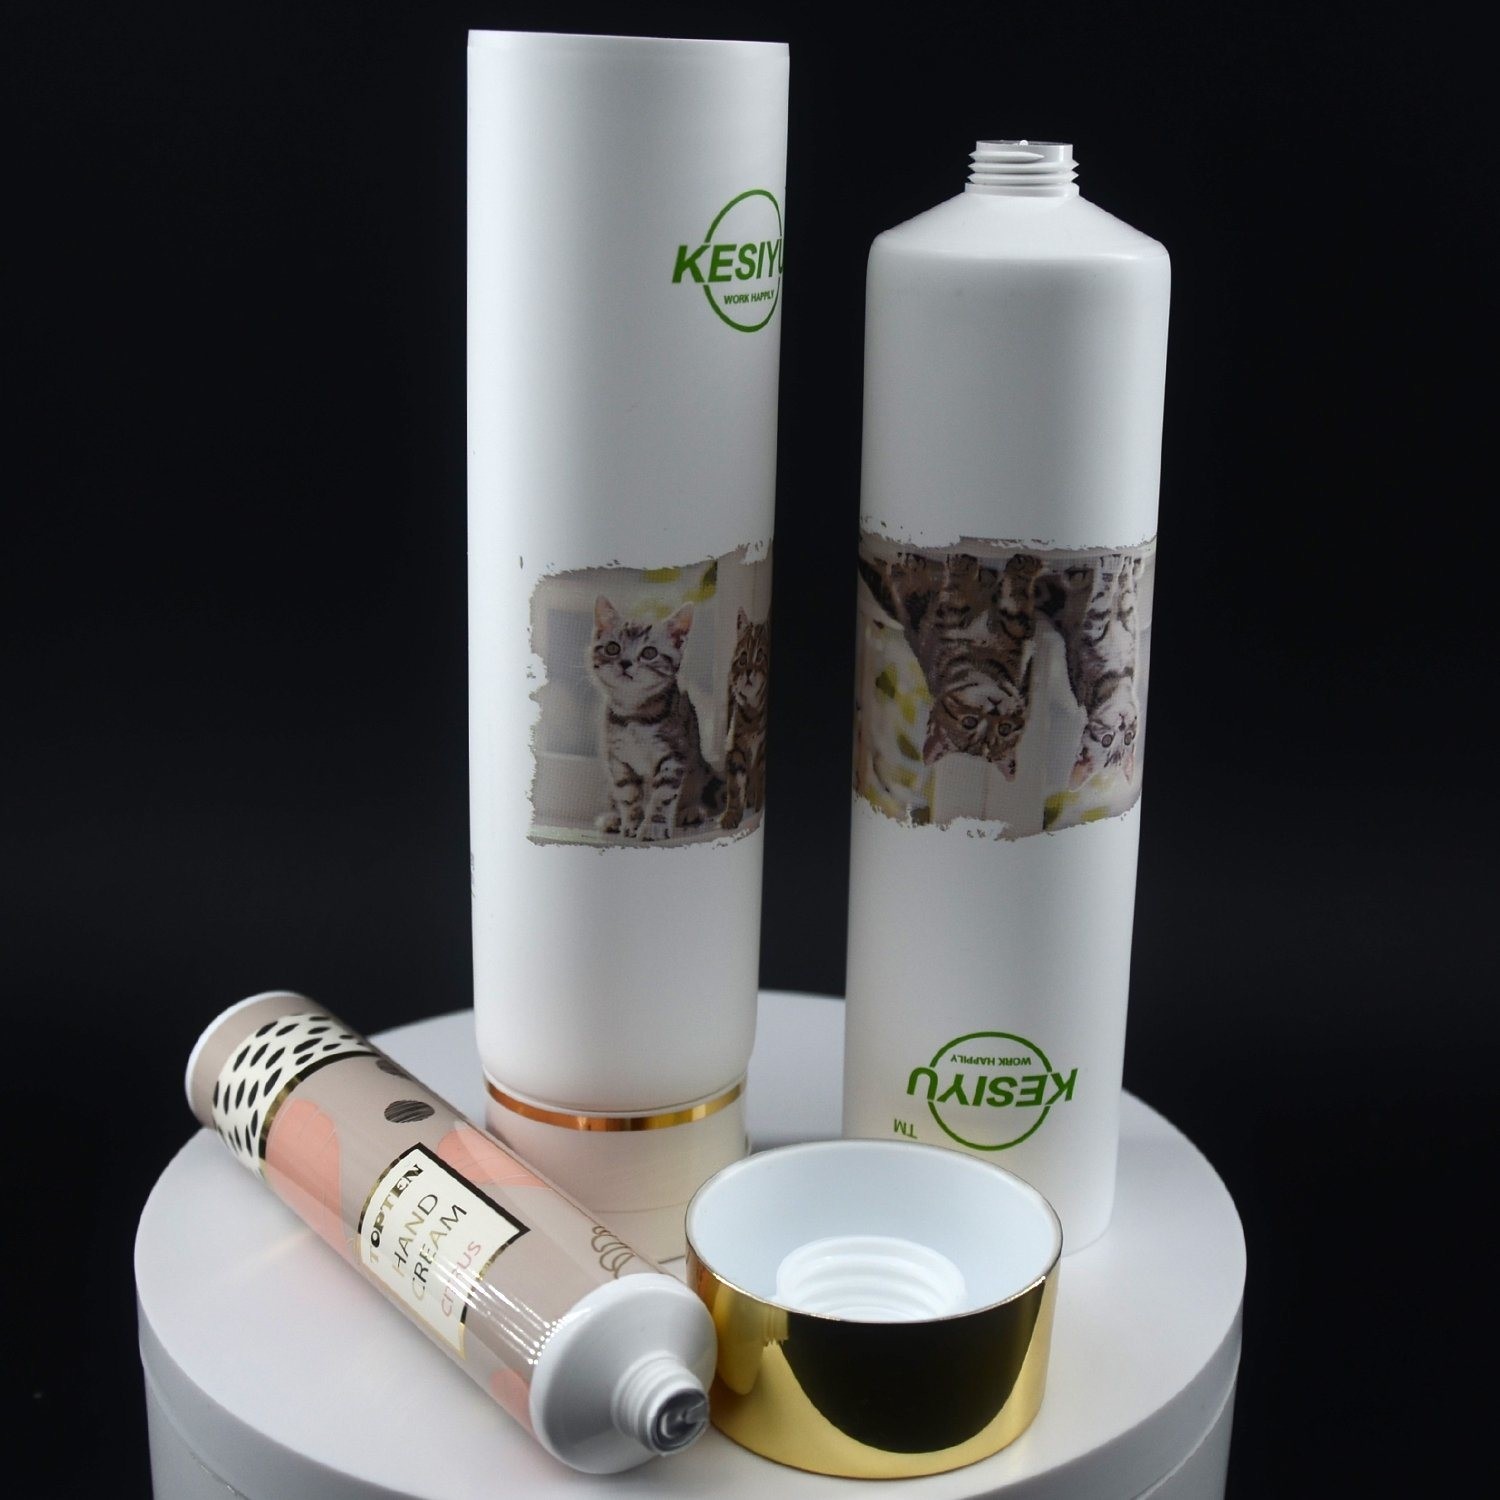 Animal Supplies Packaging Customized 100ml Cosmetic Plastic Bb Cc Cream Packaging Tube